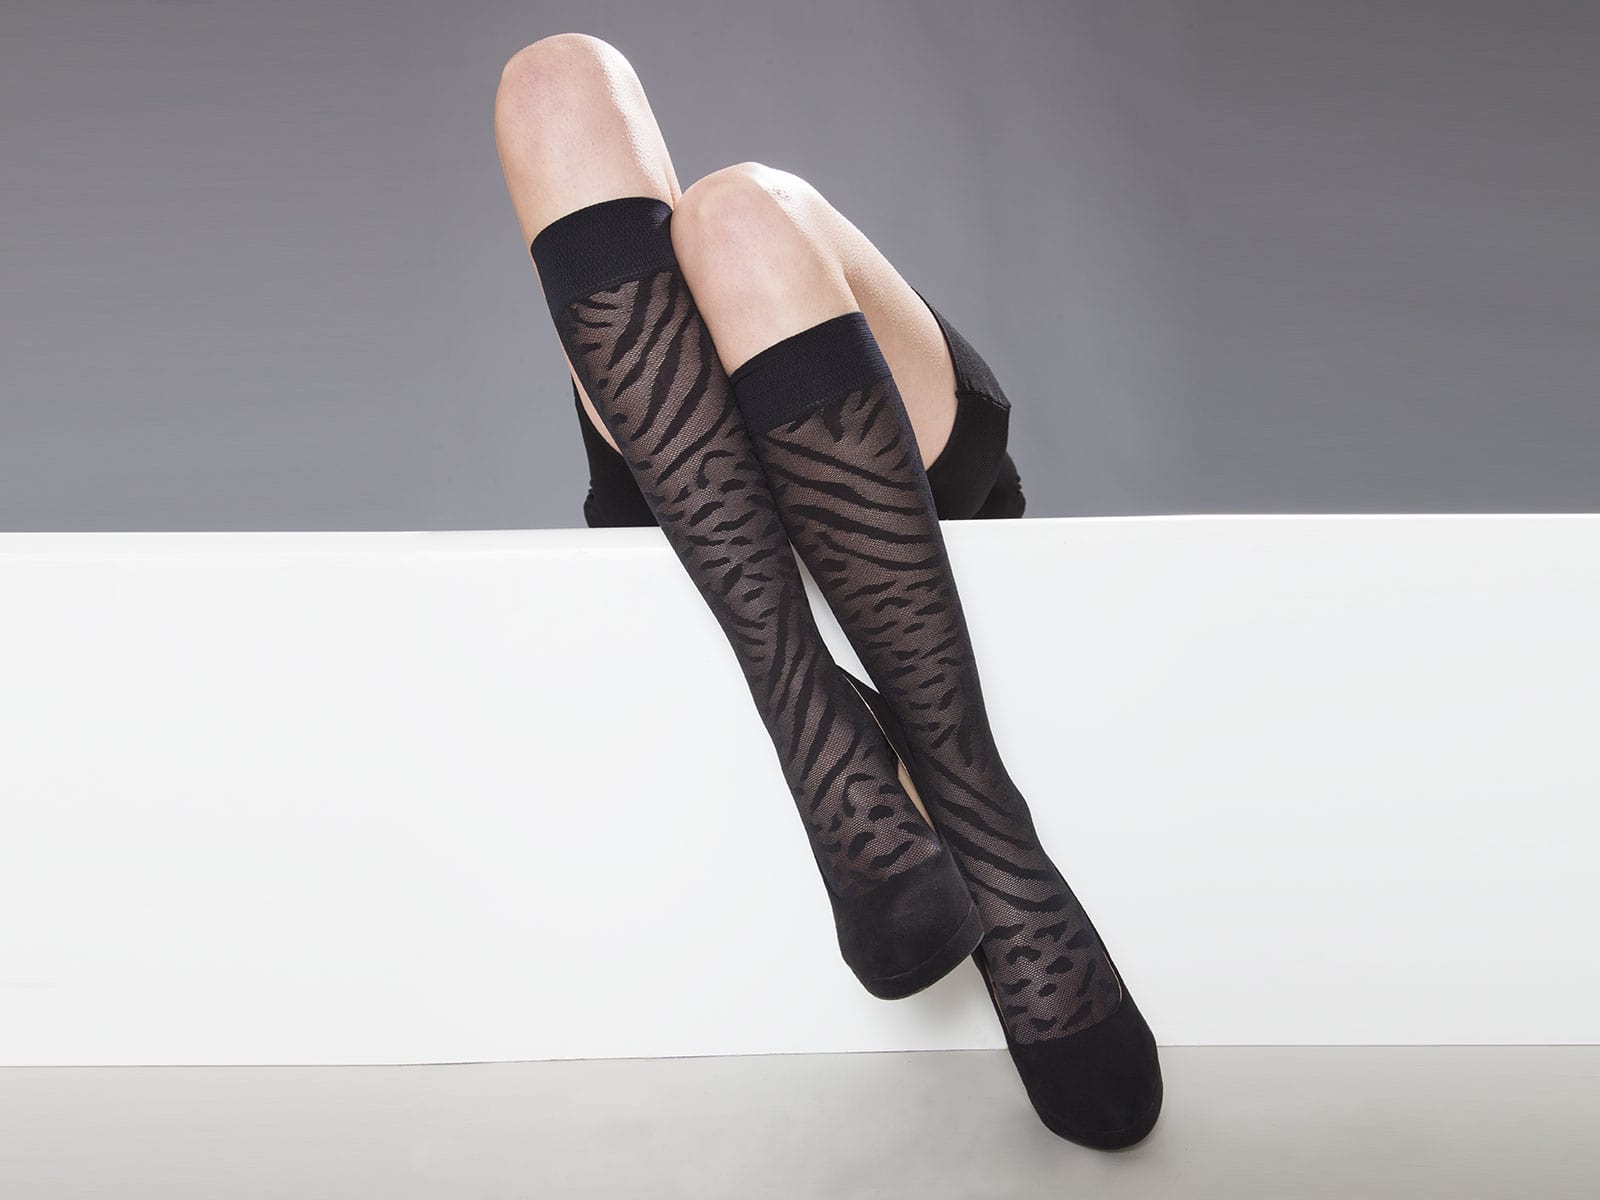 Solidea elastic stockings: beauty and effectiveness without